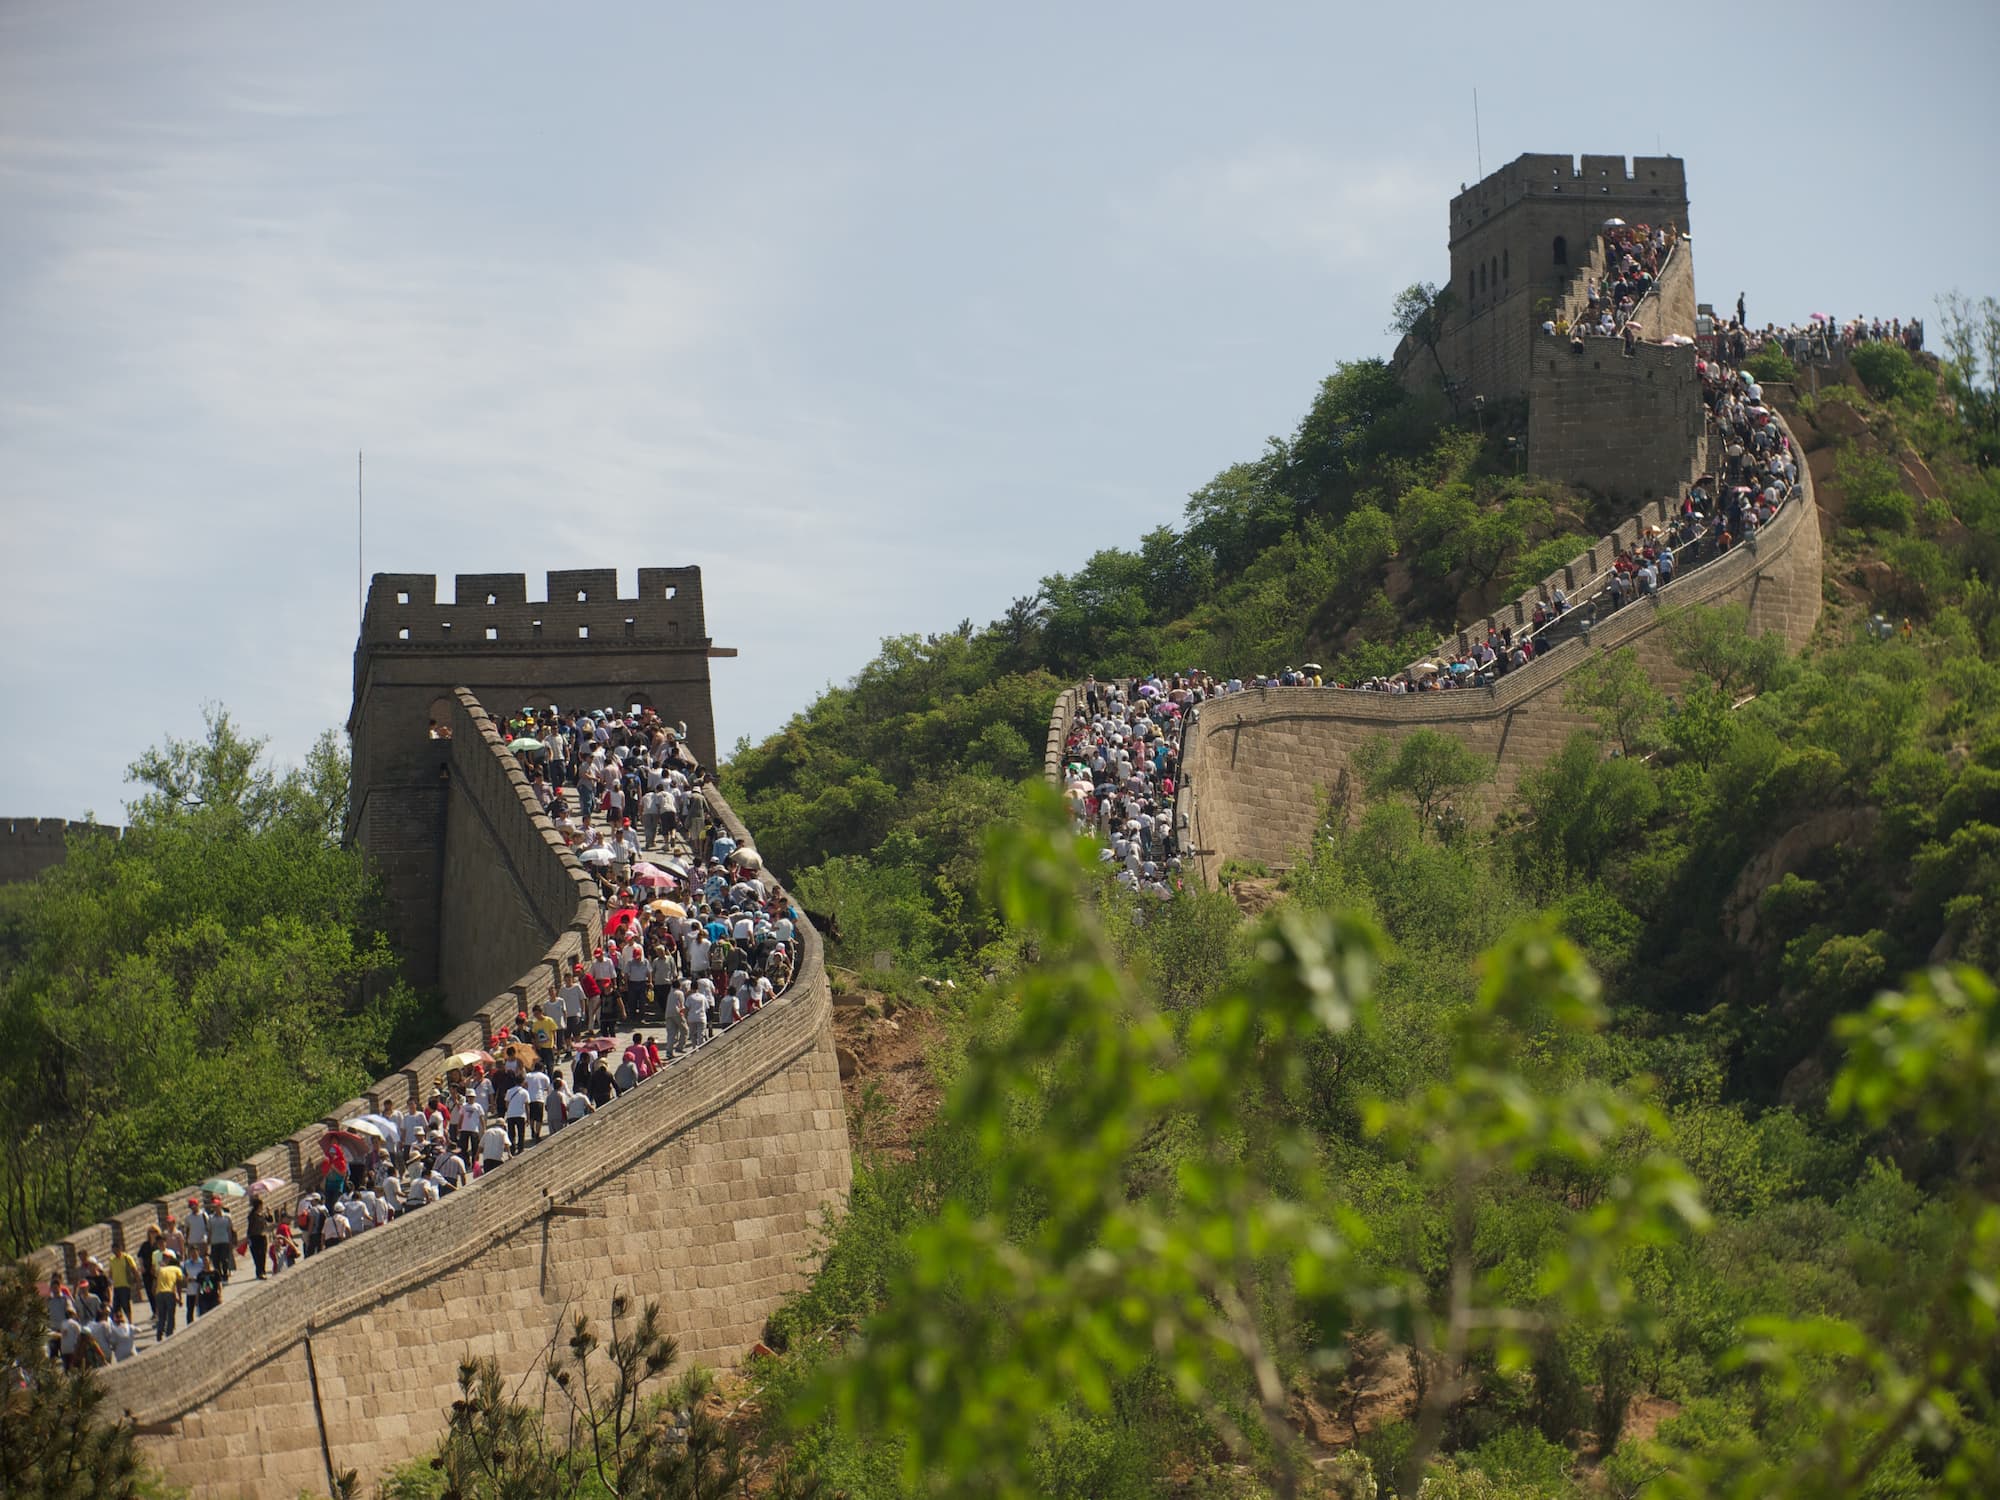 The Great Wall of China is a highlight on a cruise to Beijing